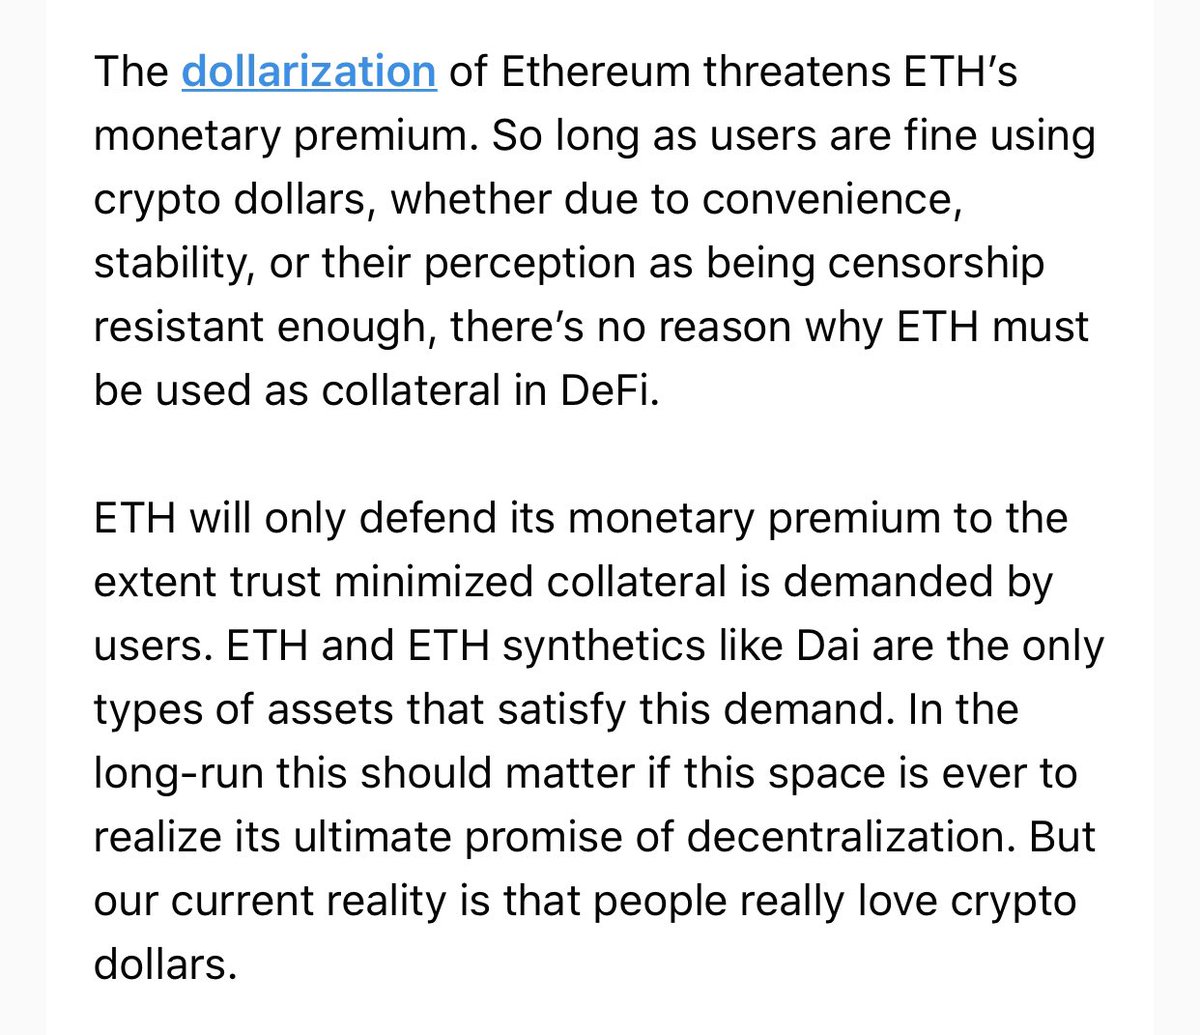 My thinking has evolved and become more nuanced over time, but my core thesis has remained the same.Crypto dollars are threat.But that threat can be mitigated.